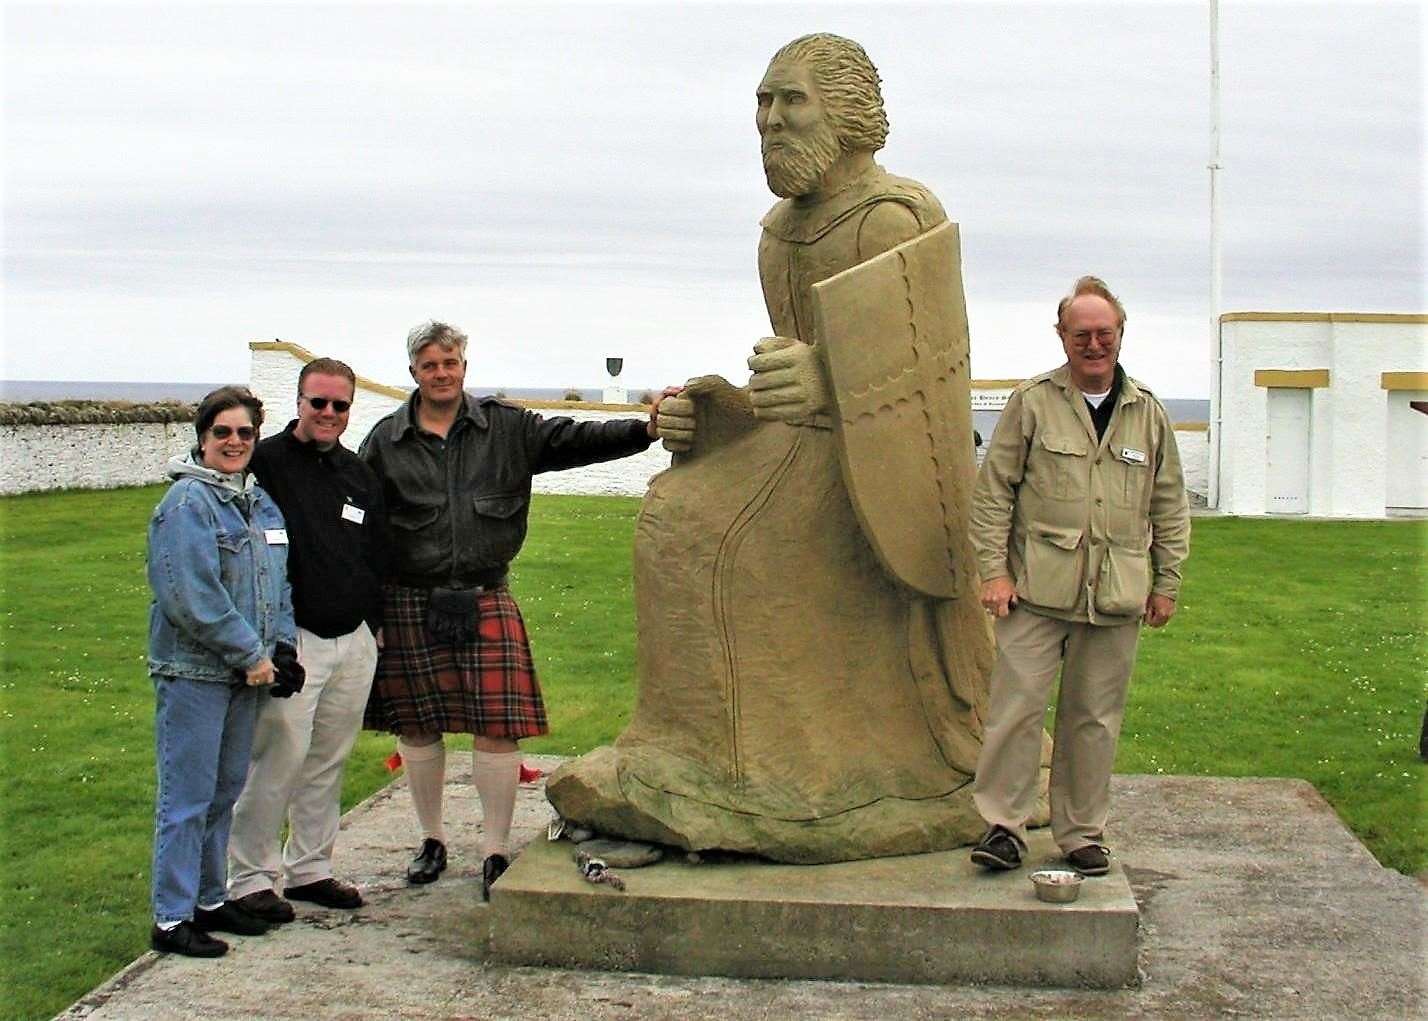 Prince Henry Sinclair statue at Noss Head lighthouse created by Shawn Williamson (wearing kilt). The image was taken around 2005 near the Sinclair Study Centre and with Clan Gunn members.